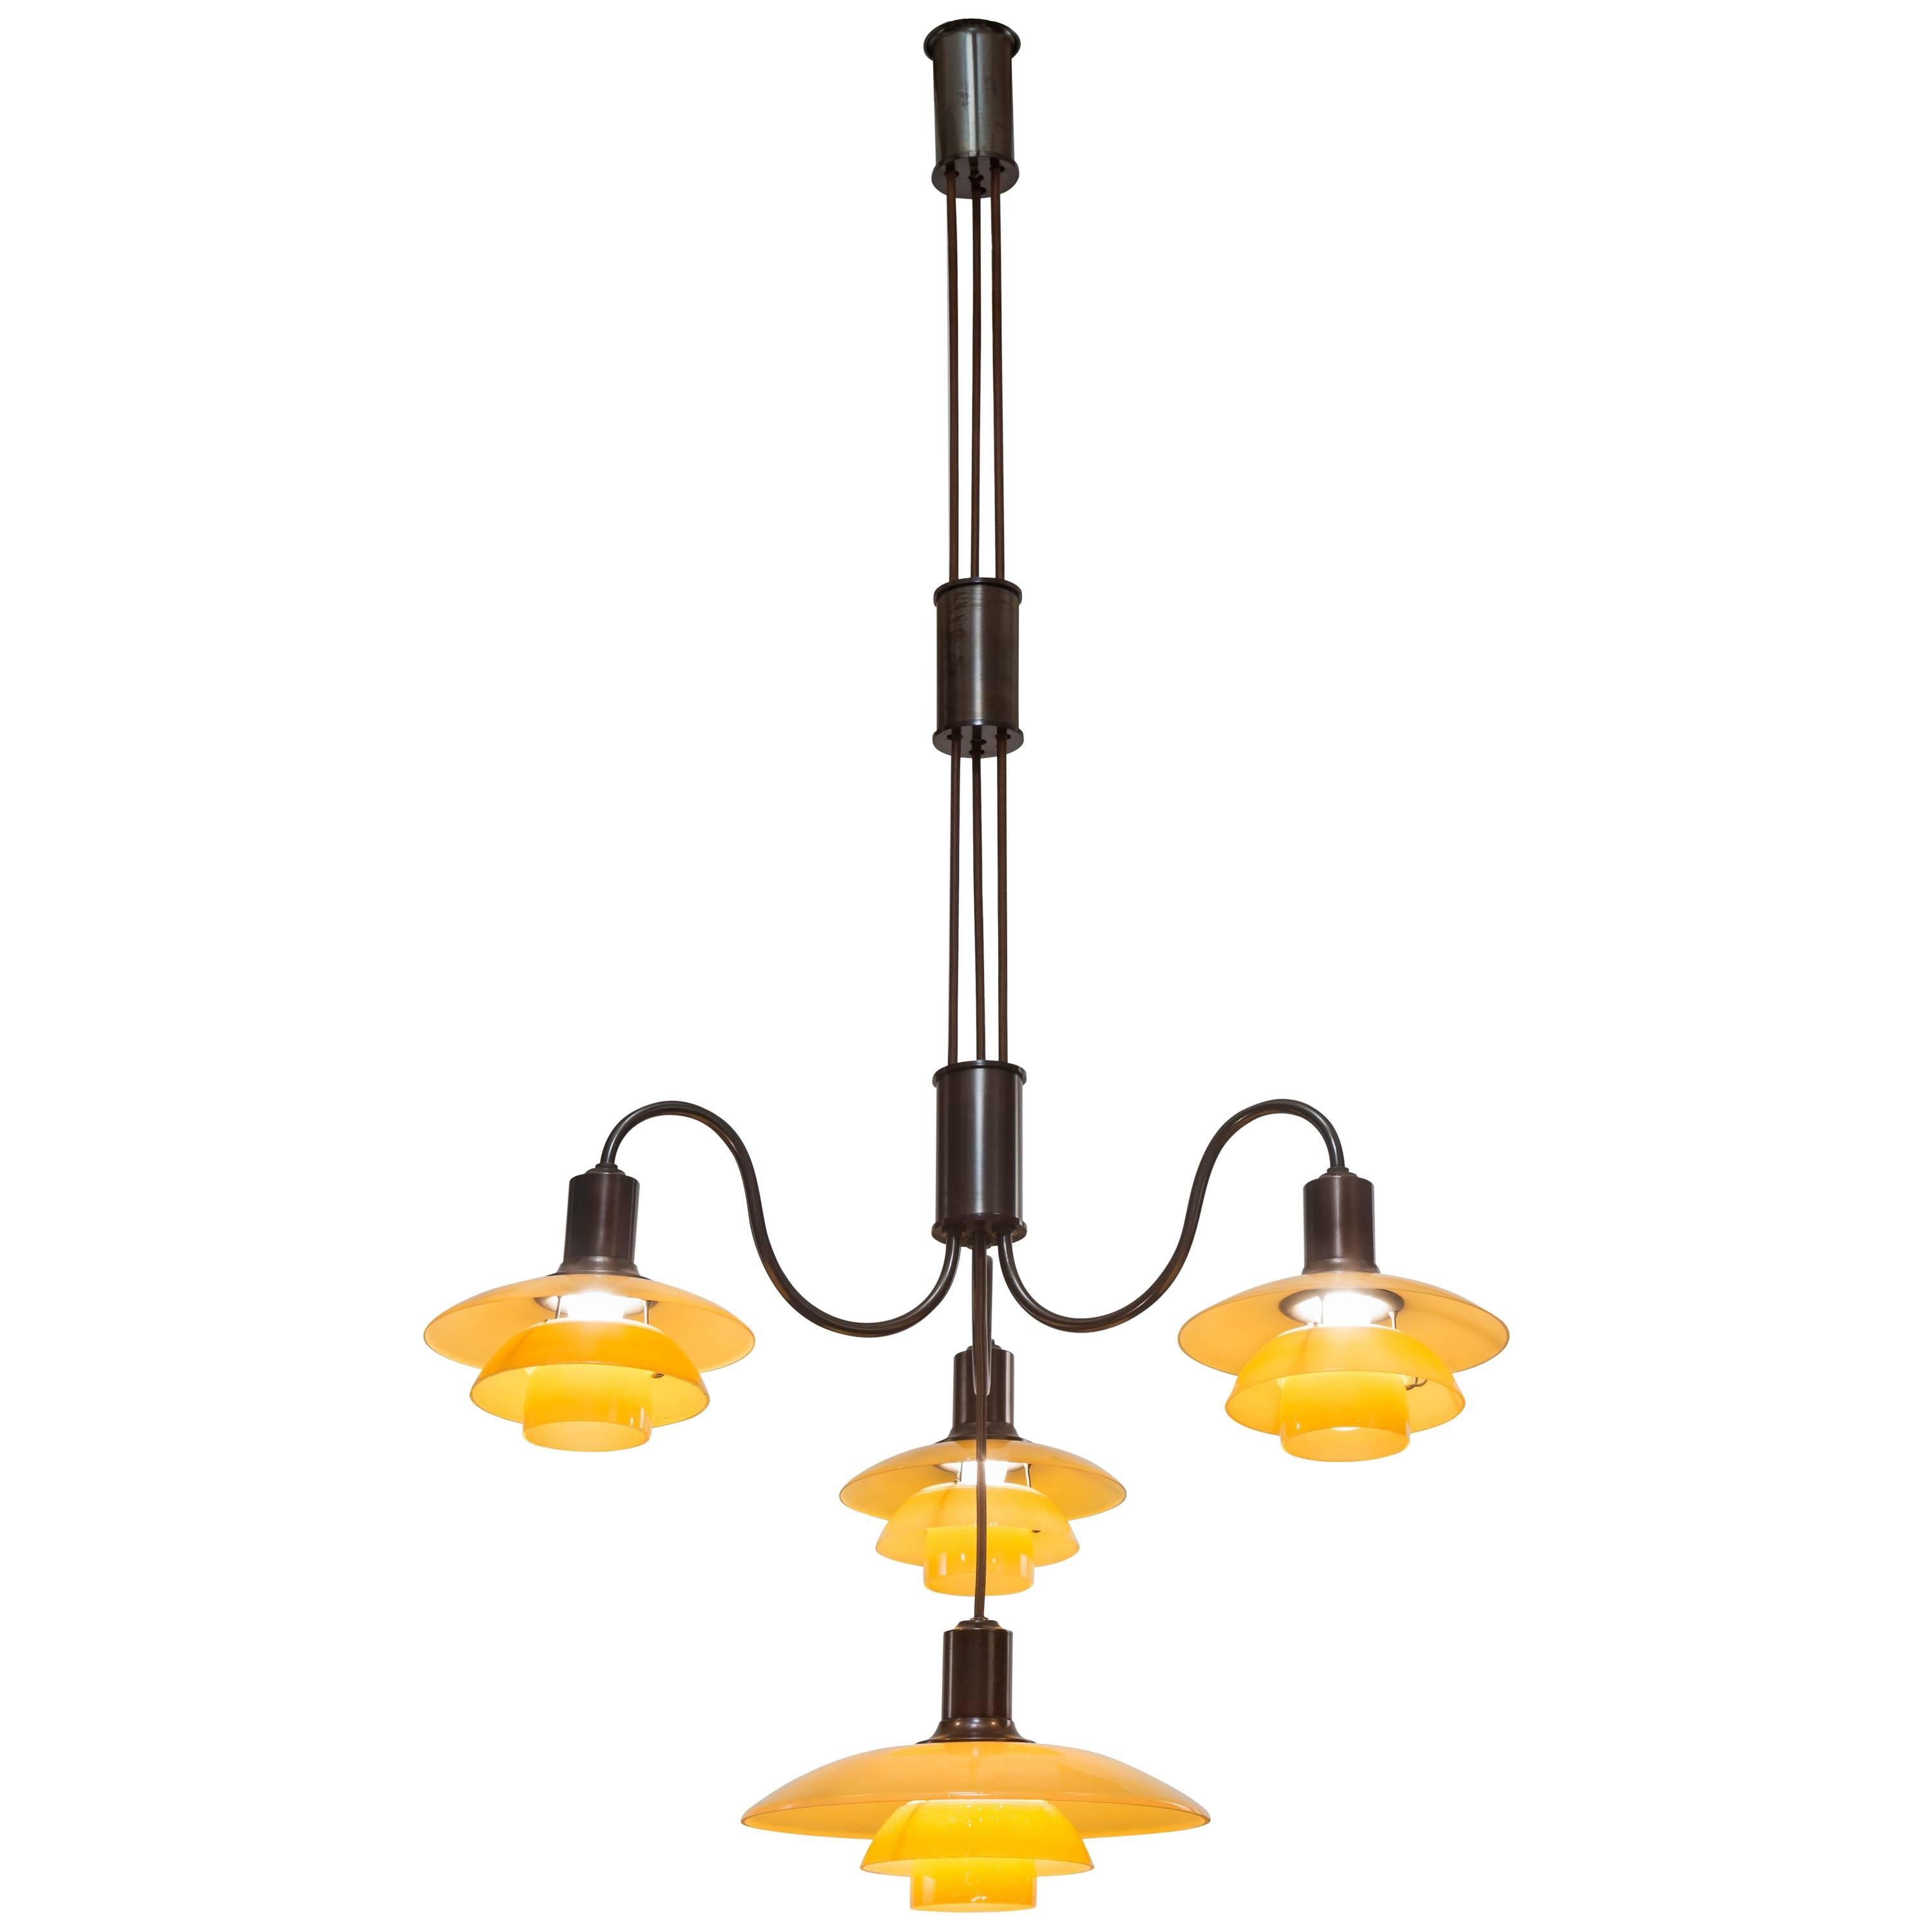 Adjustable height chandelier in very good condition. The cylindrical canopy, suspending two height-adjusting cylinders of patinated brass connected by cords, the bottom cylinder issuing three graceful s-curved arms, each arm with a 2/2 yellow